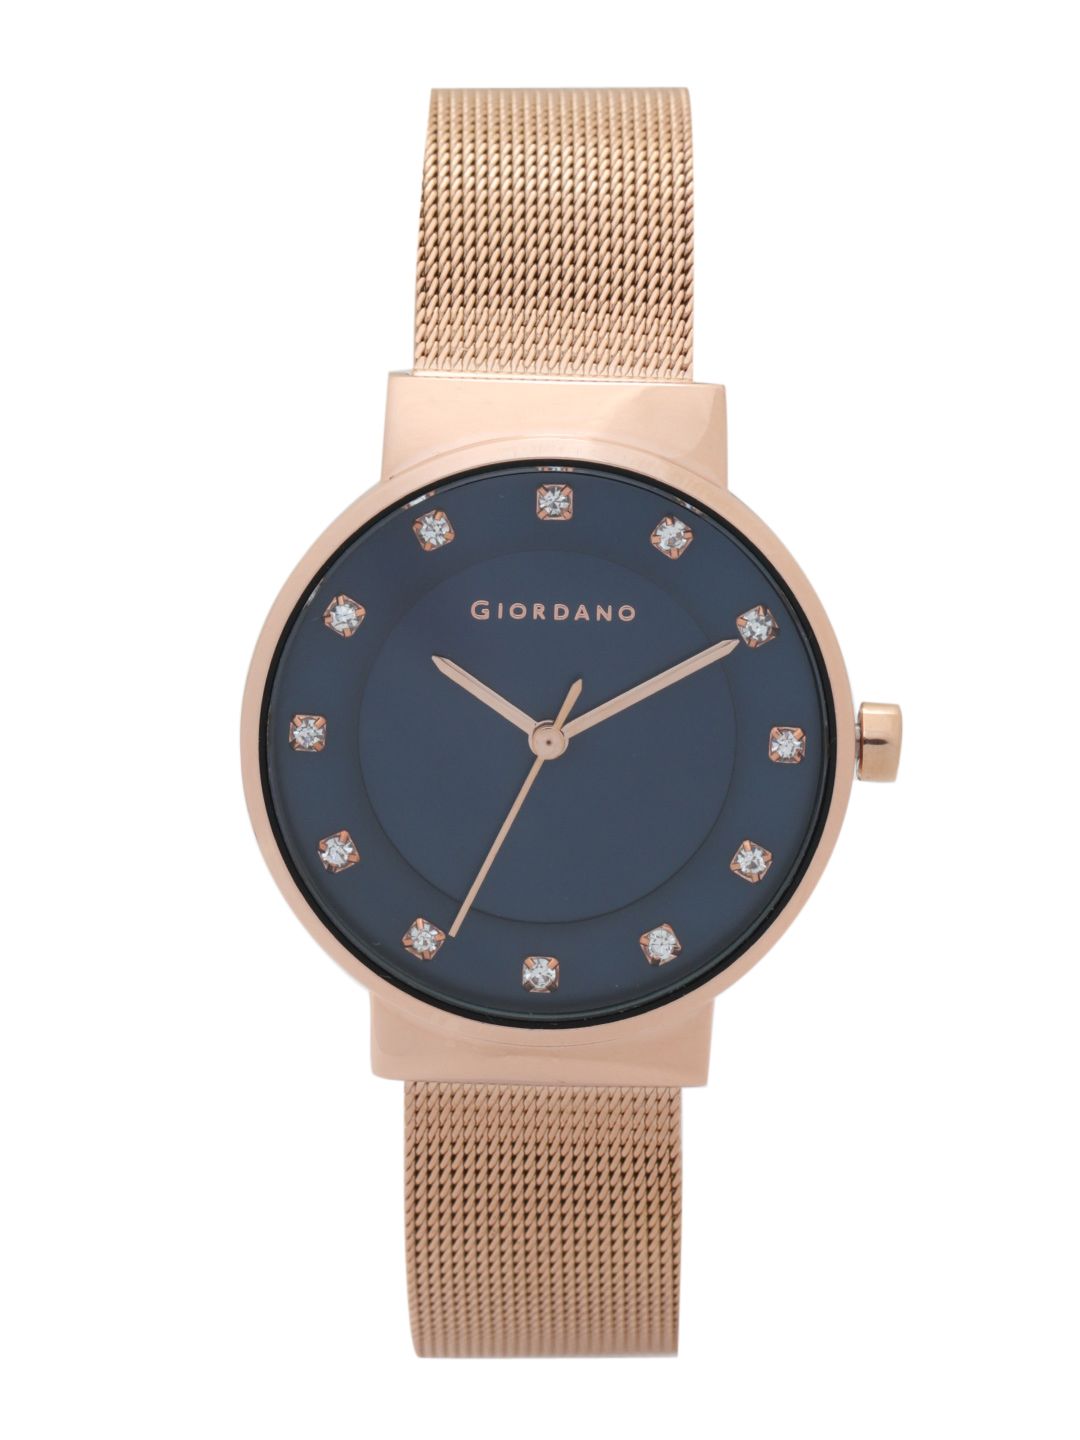 GIORDANO Women Navy Blue Analogue Watch A2062-44 Price in India